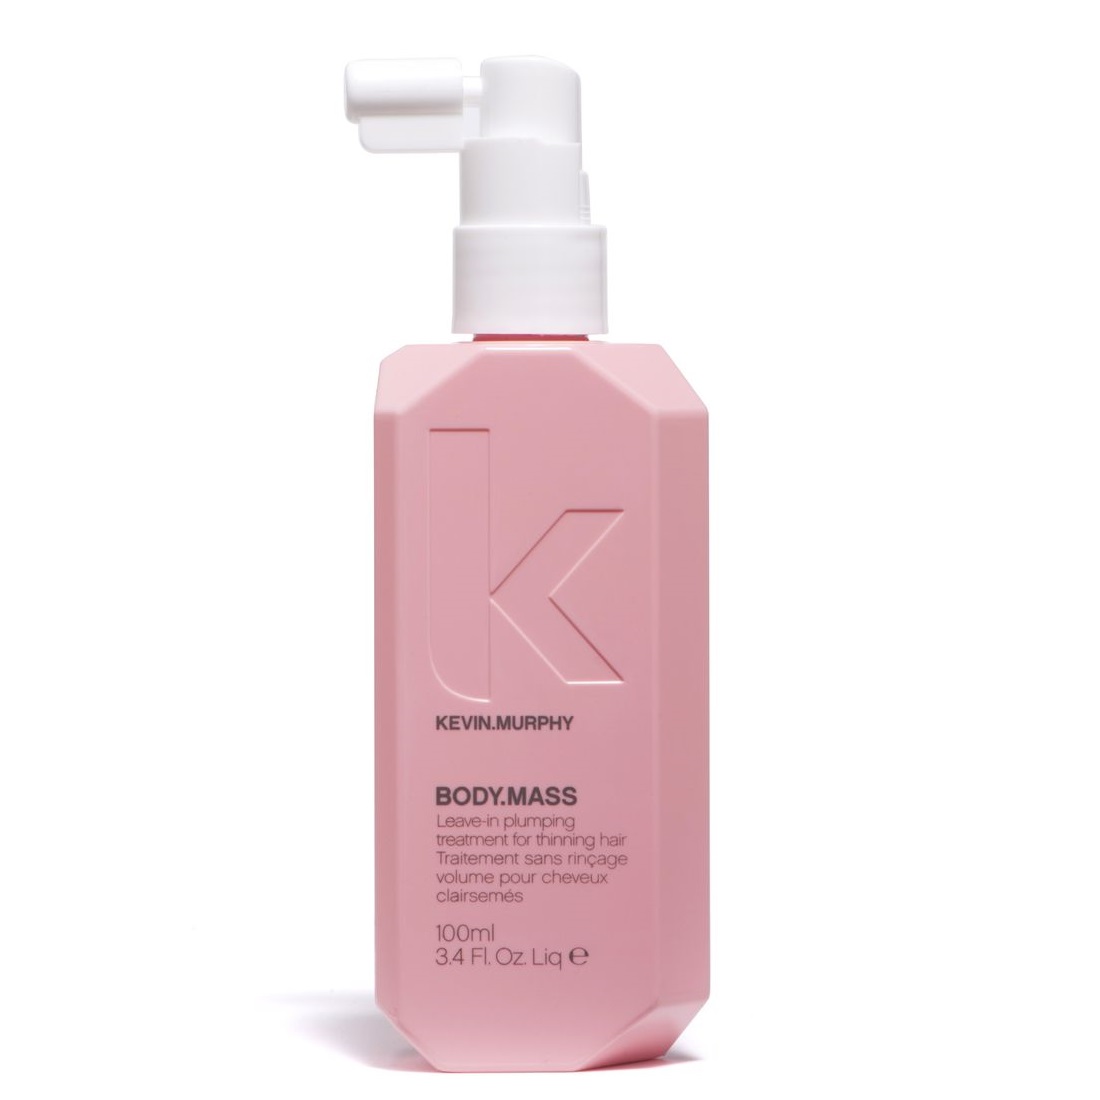 Kevin Murphy Body Mass- Leave-in tratament revitalizant 100ml haircare.ro imagine